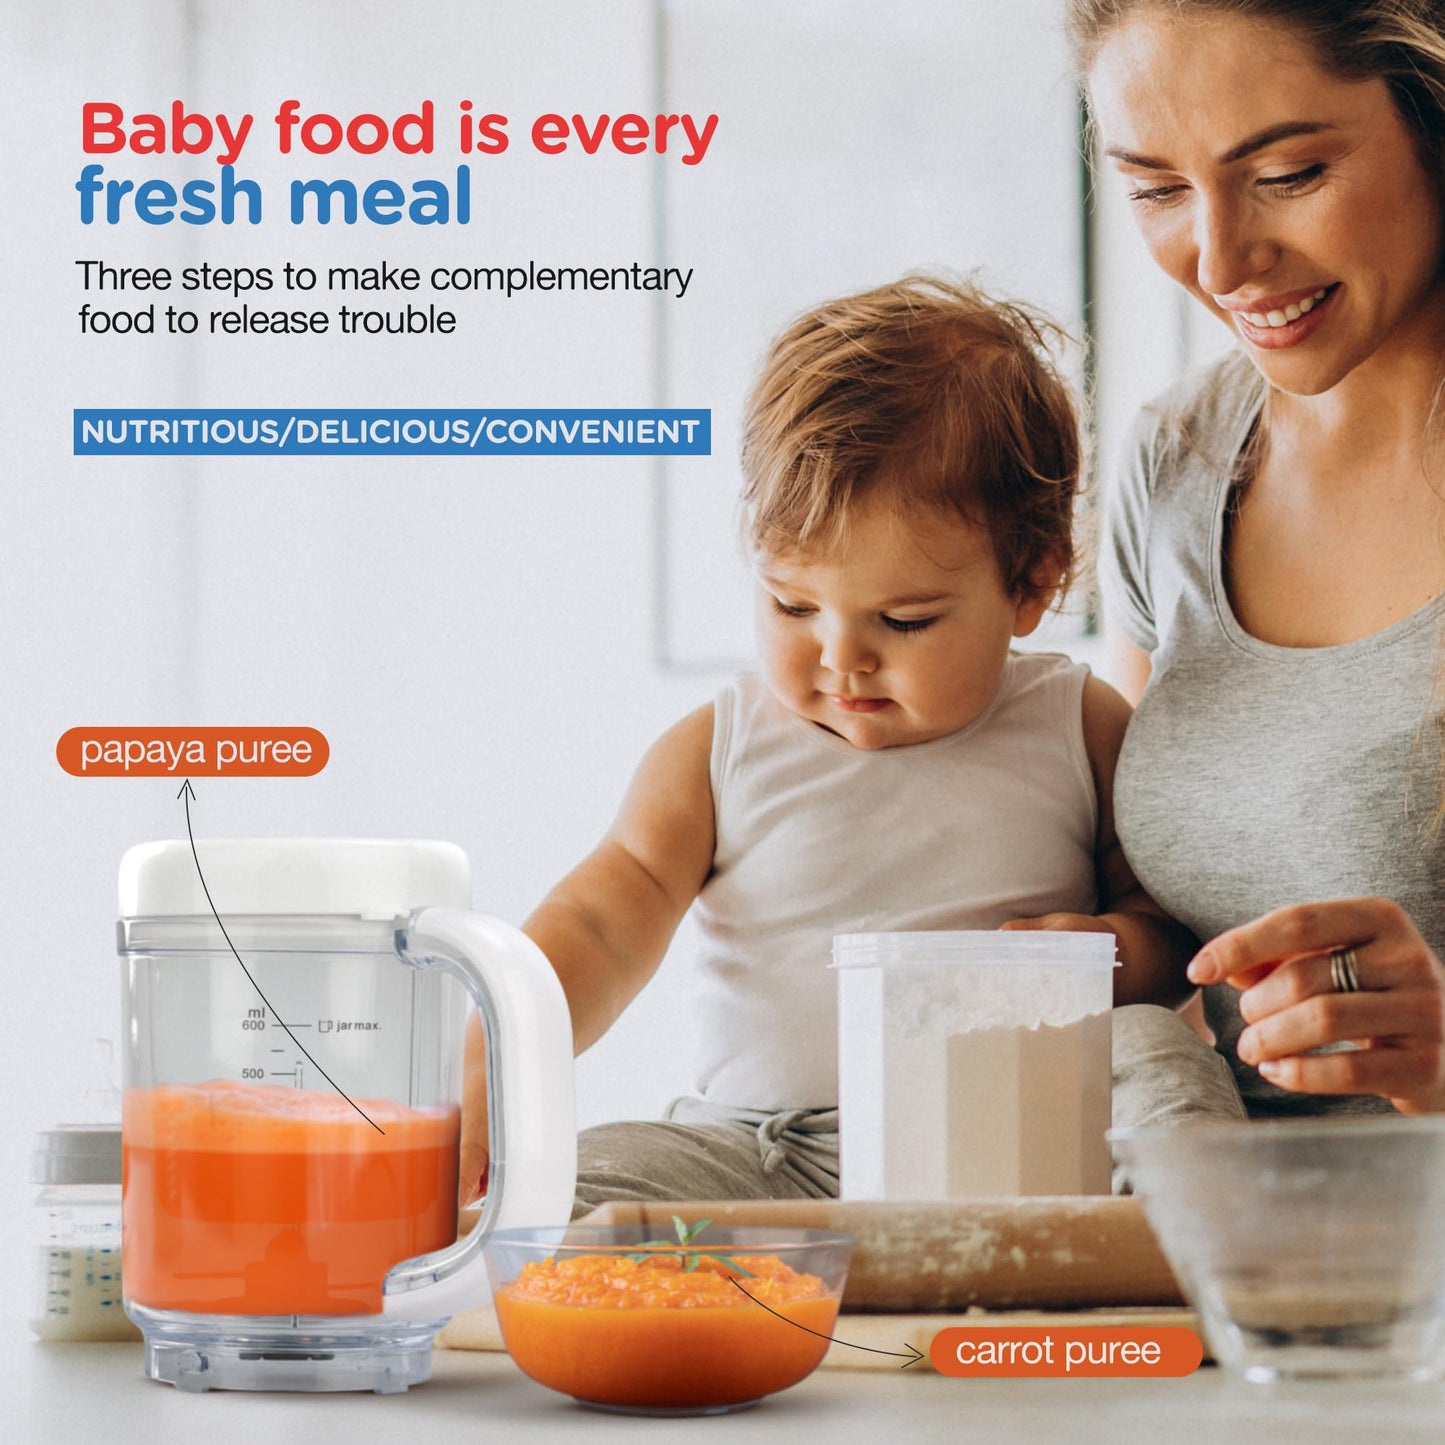 BAYBEE 4-in-1 Multifunctional Electric Baby Food Processor for Baby Food Maker with Steamer, Chopper & Grinder | Portable Baby Food Blender and Steamer | Food Mixer Smart Heat Baby Blender